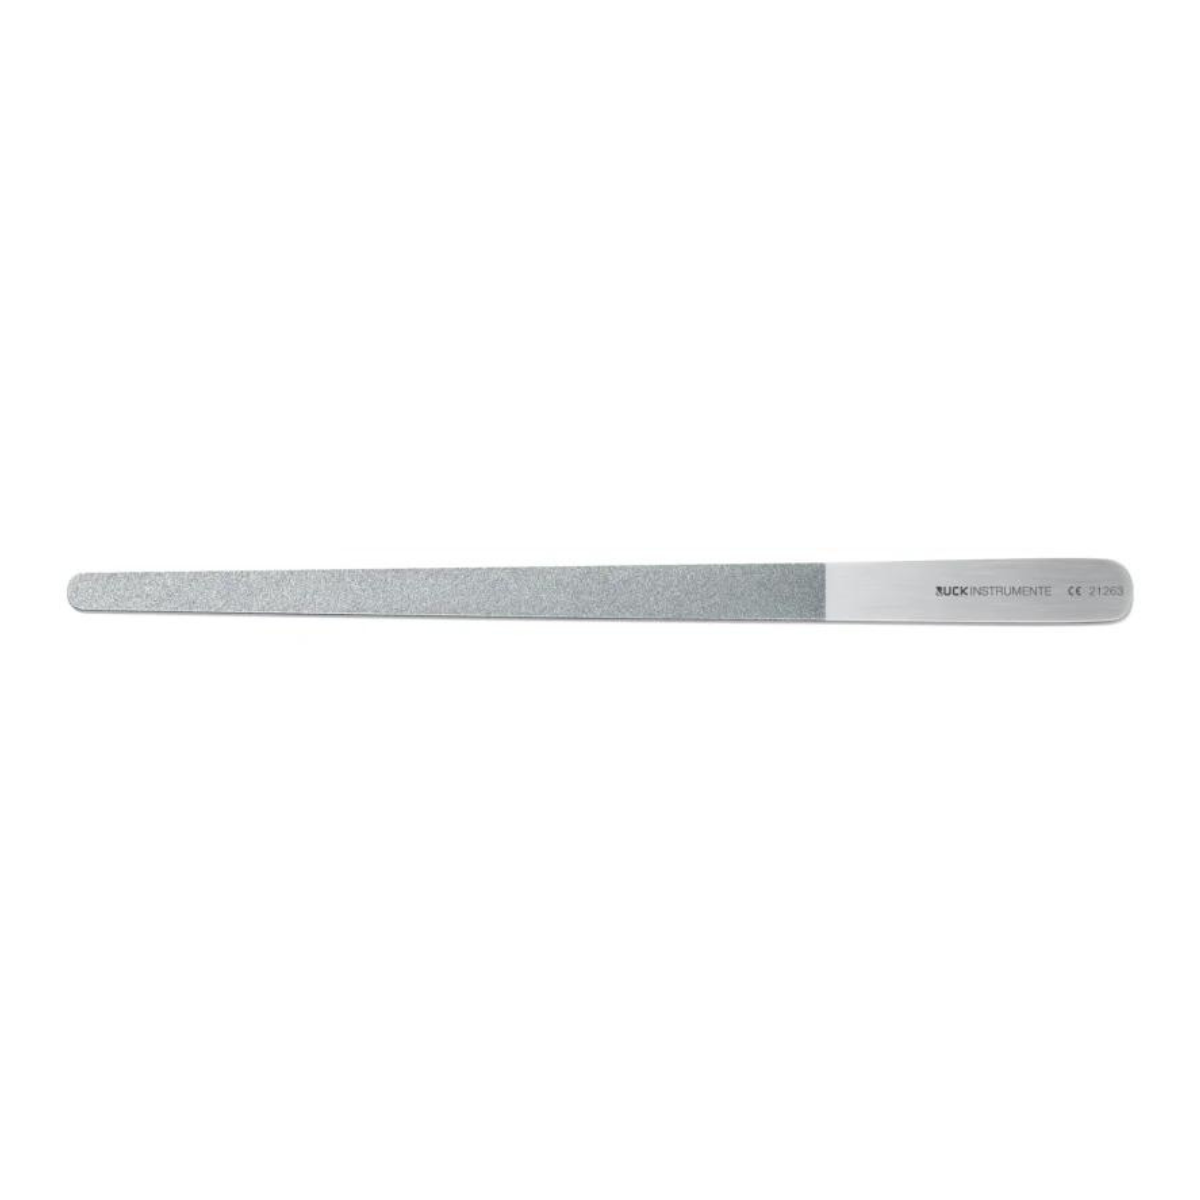 RUCK Steel nail file 19.5cm